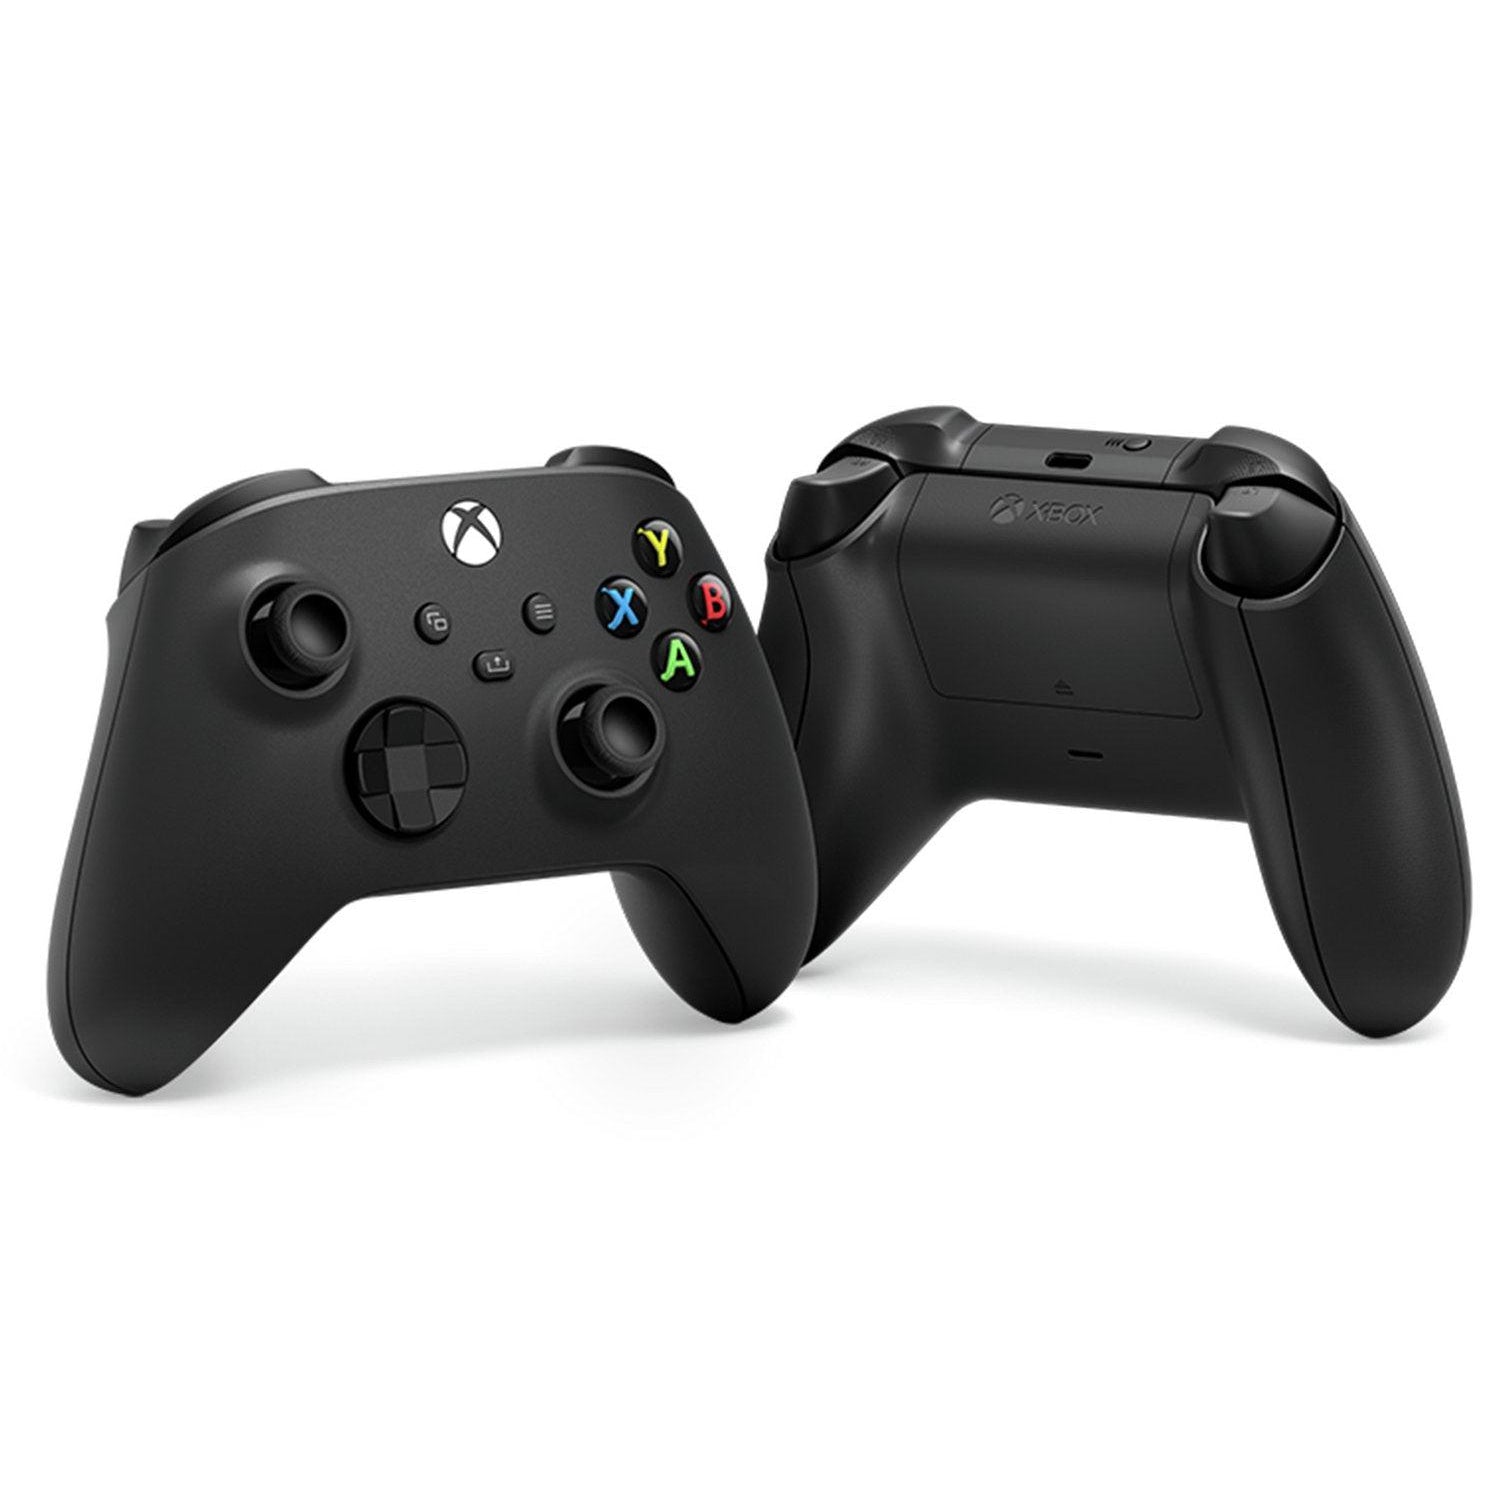 Microsoft Xbox Series X/S Wireless Controller - Carbon Black - Refurbished Excellent